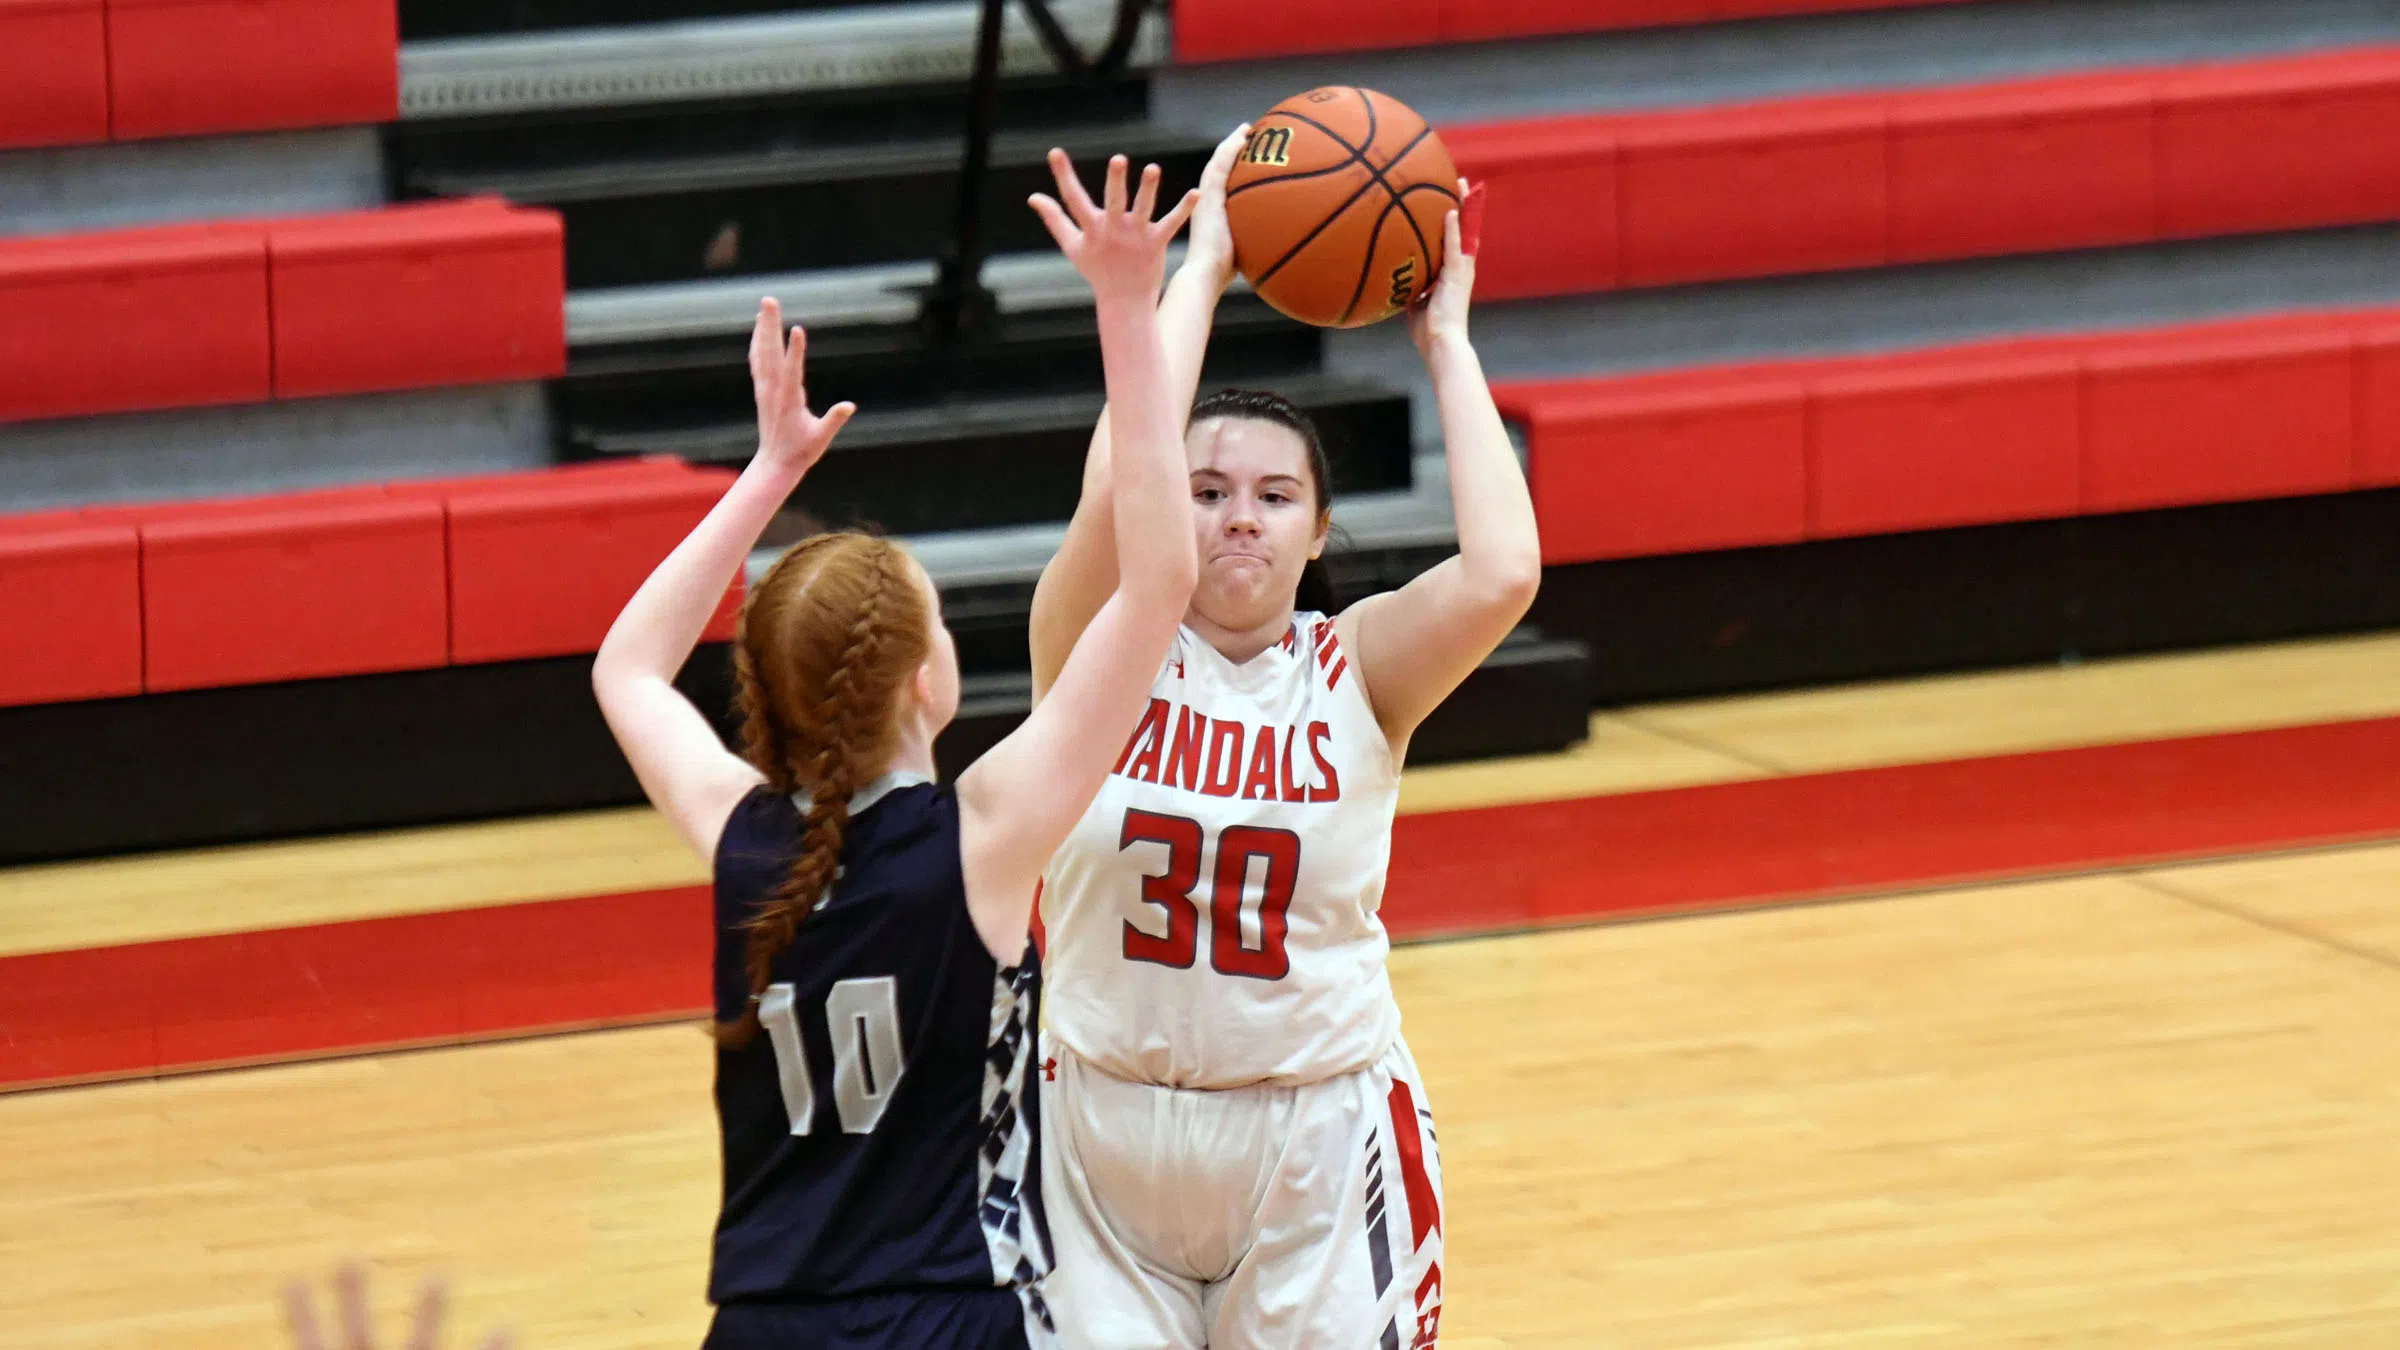 Lady Vandals rally in 2nd half to beat CORL | I70Sports